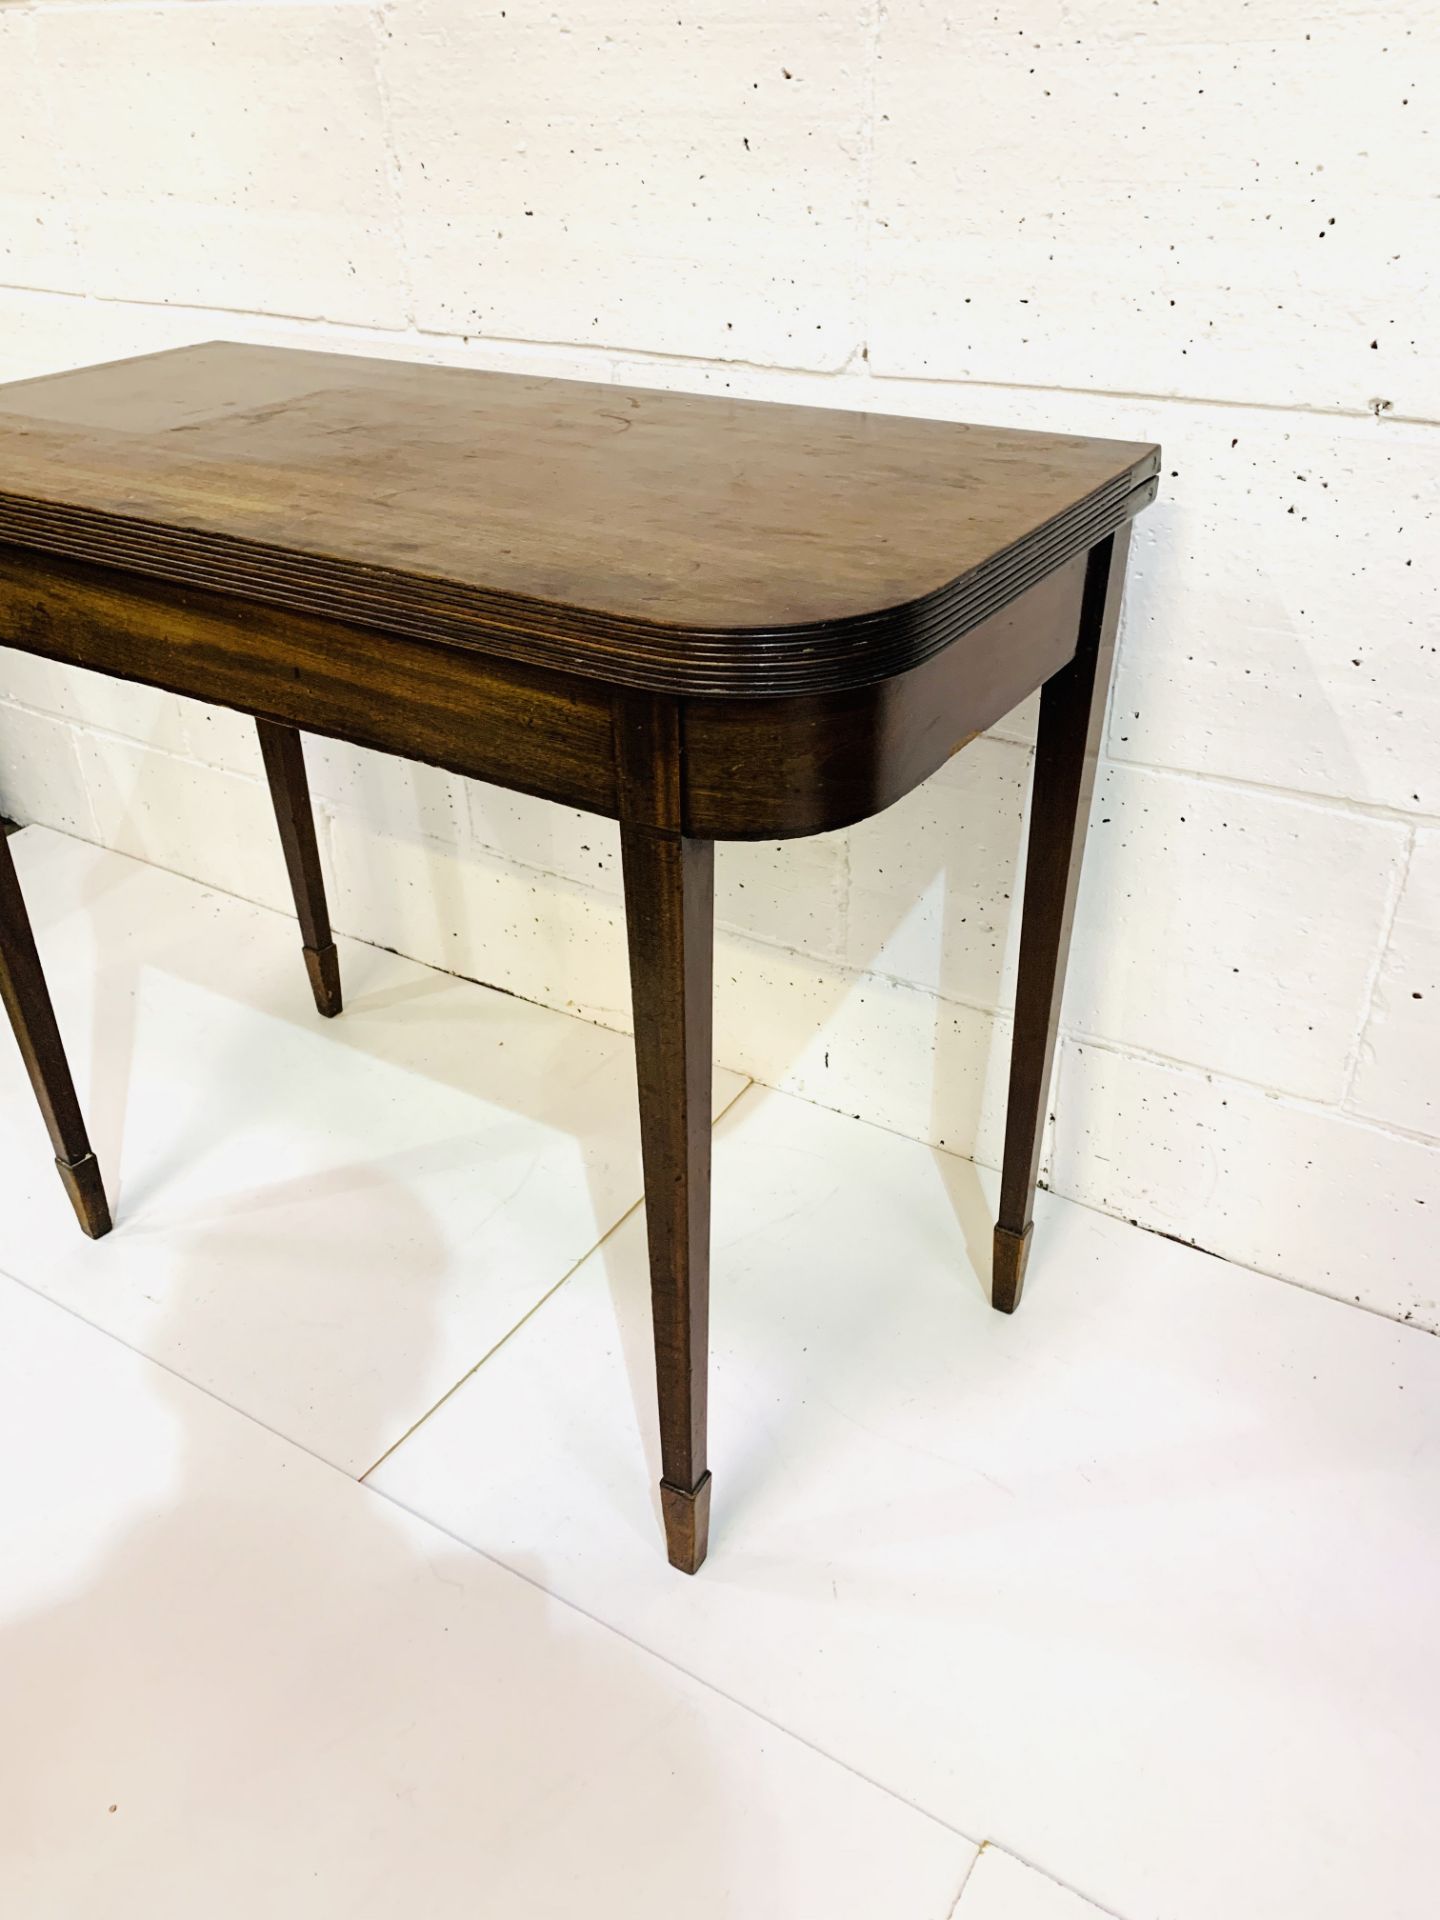 Mahogany gate leg side table with fold over top on tapered legs. - Image 3 of 4